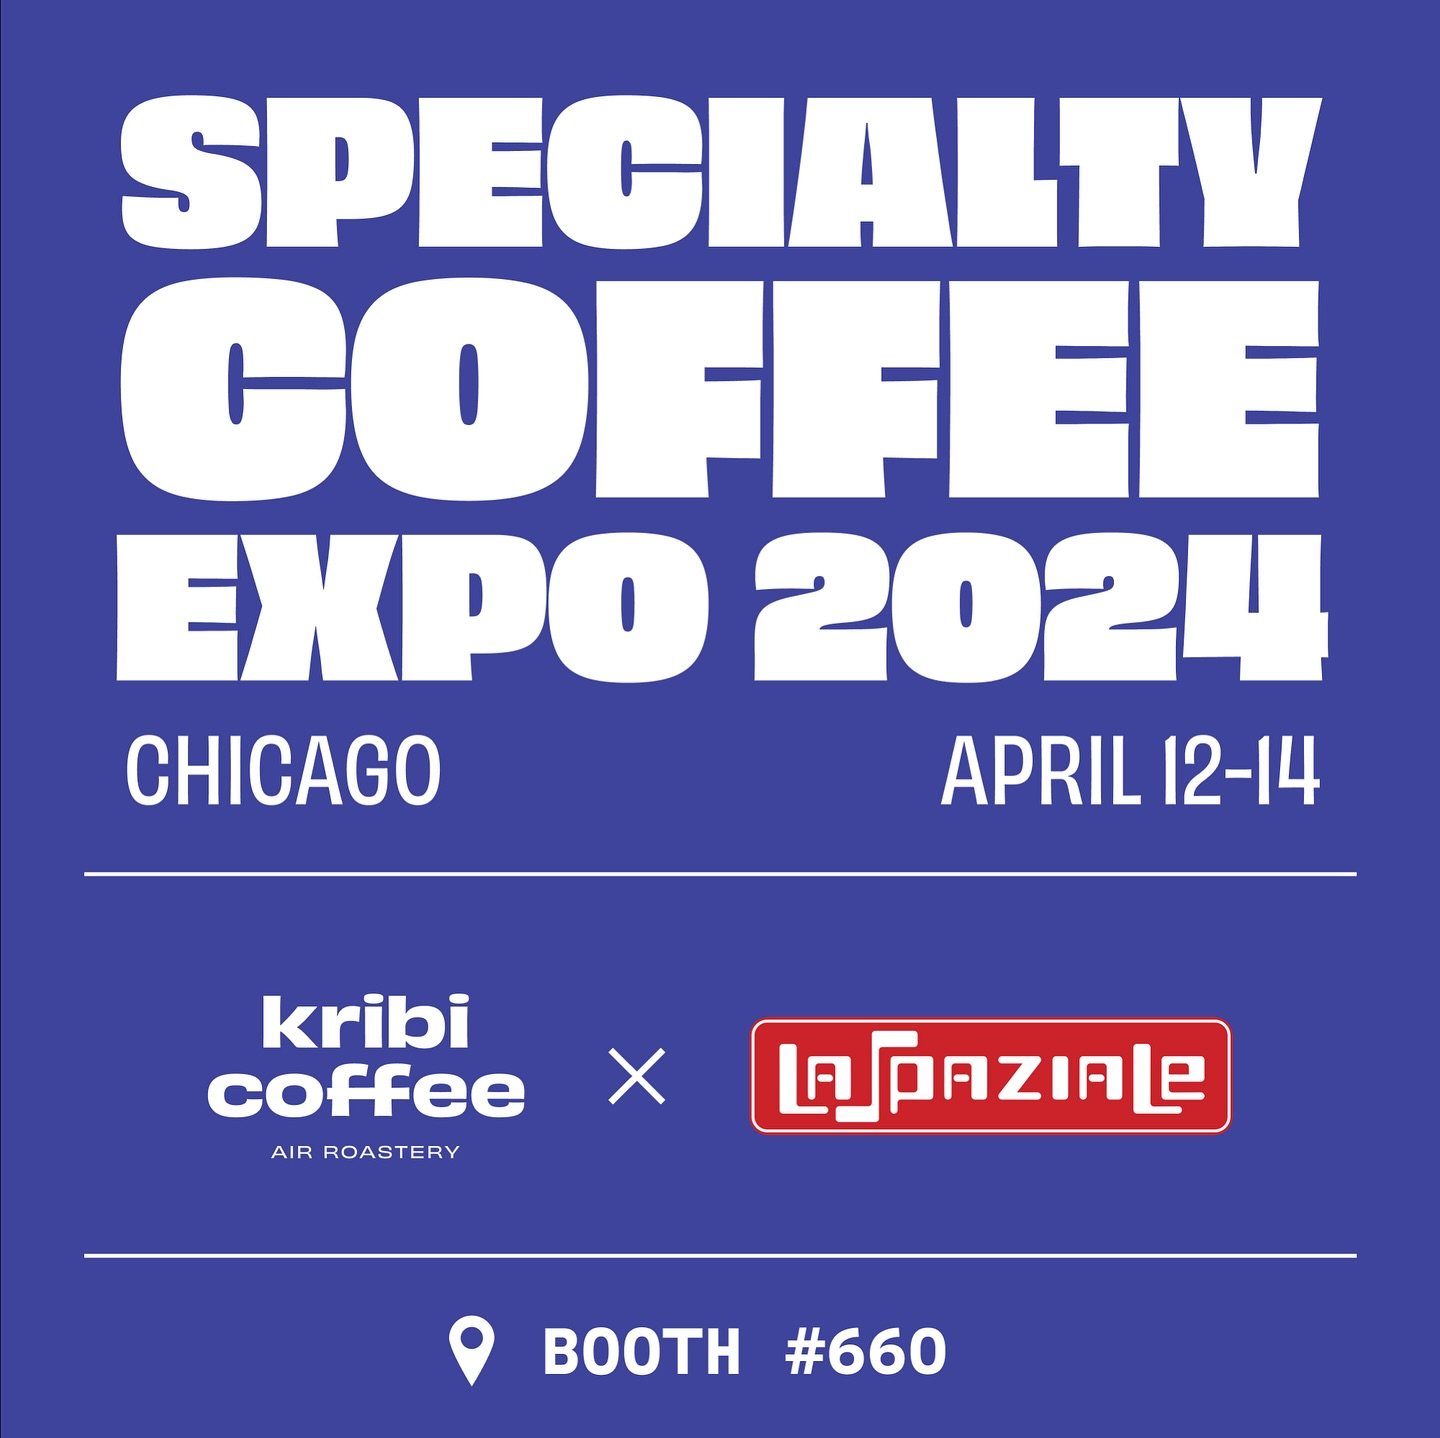 🎉 We&rsquo;re thrilled to announce we&rsquo;ll be at the Chicago Specialty Coffee Expo 2024 this weekend! Come find us at Booth #660 with our proud partners La Spaziale. ☕️🤝

👀 Join us for a mix of tastings, learn about our relationships with our 